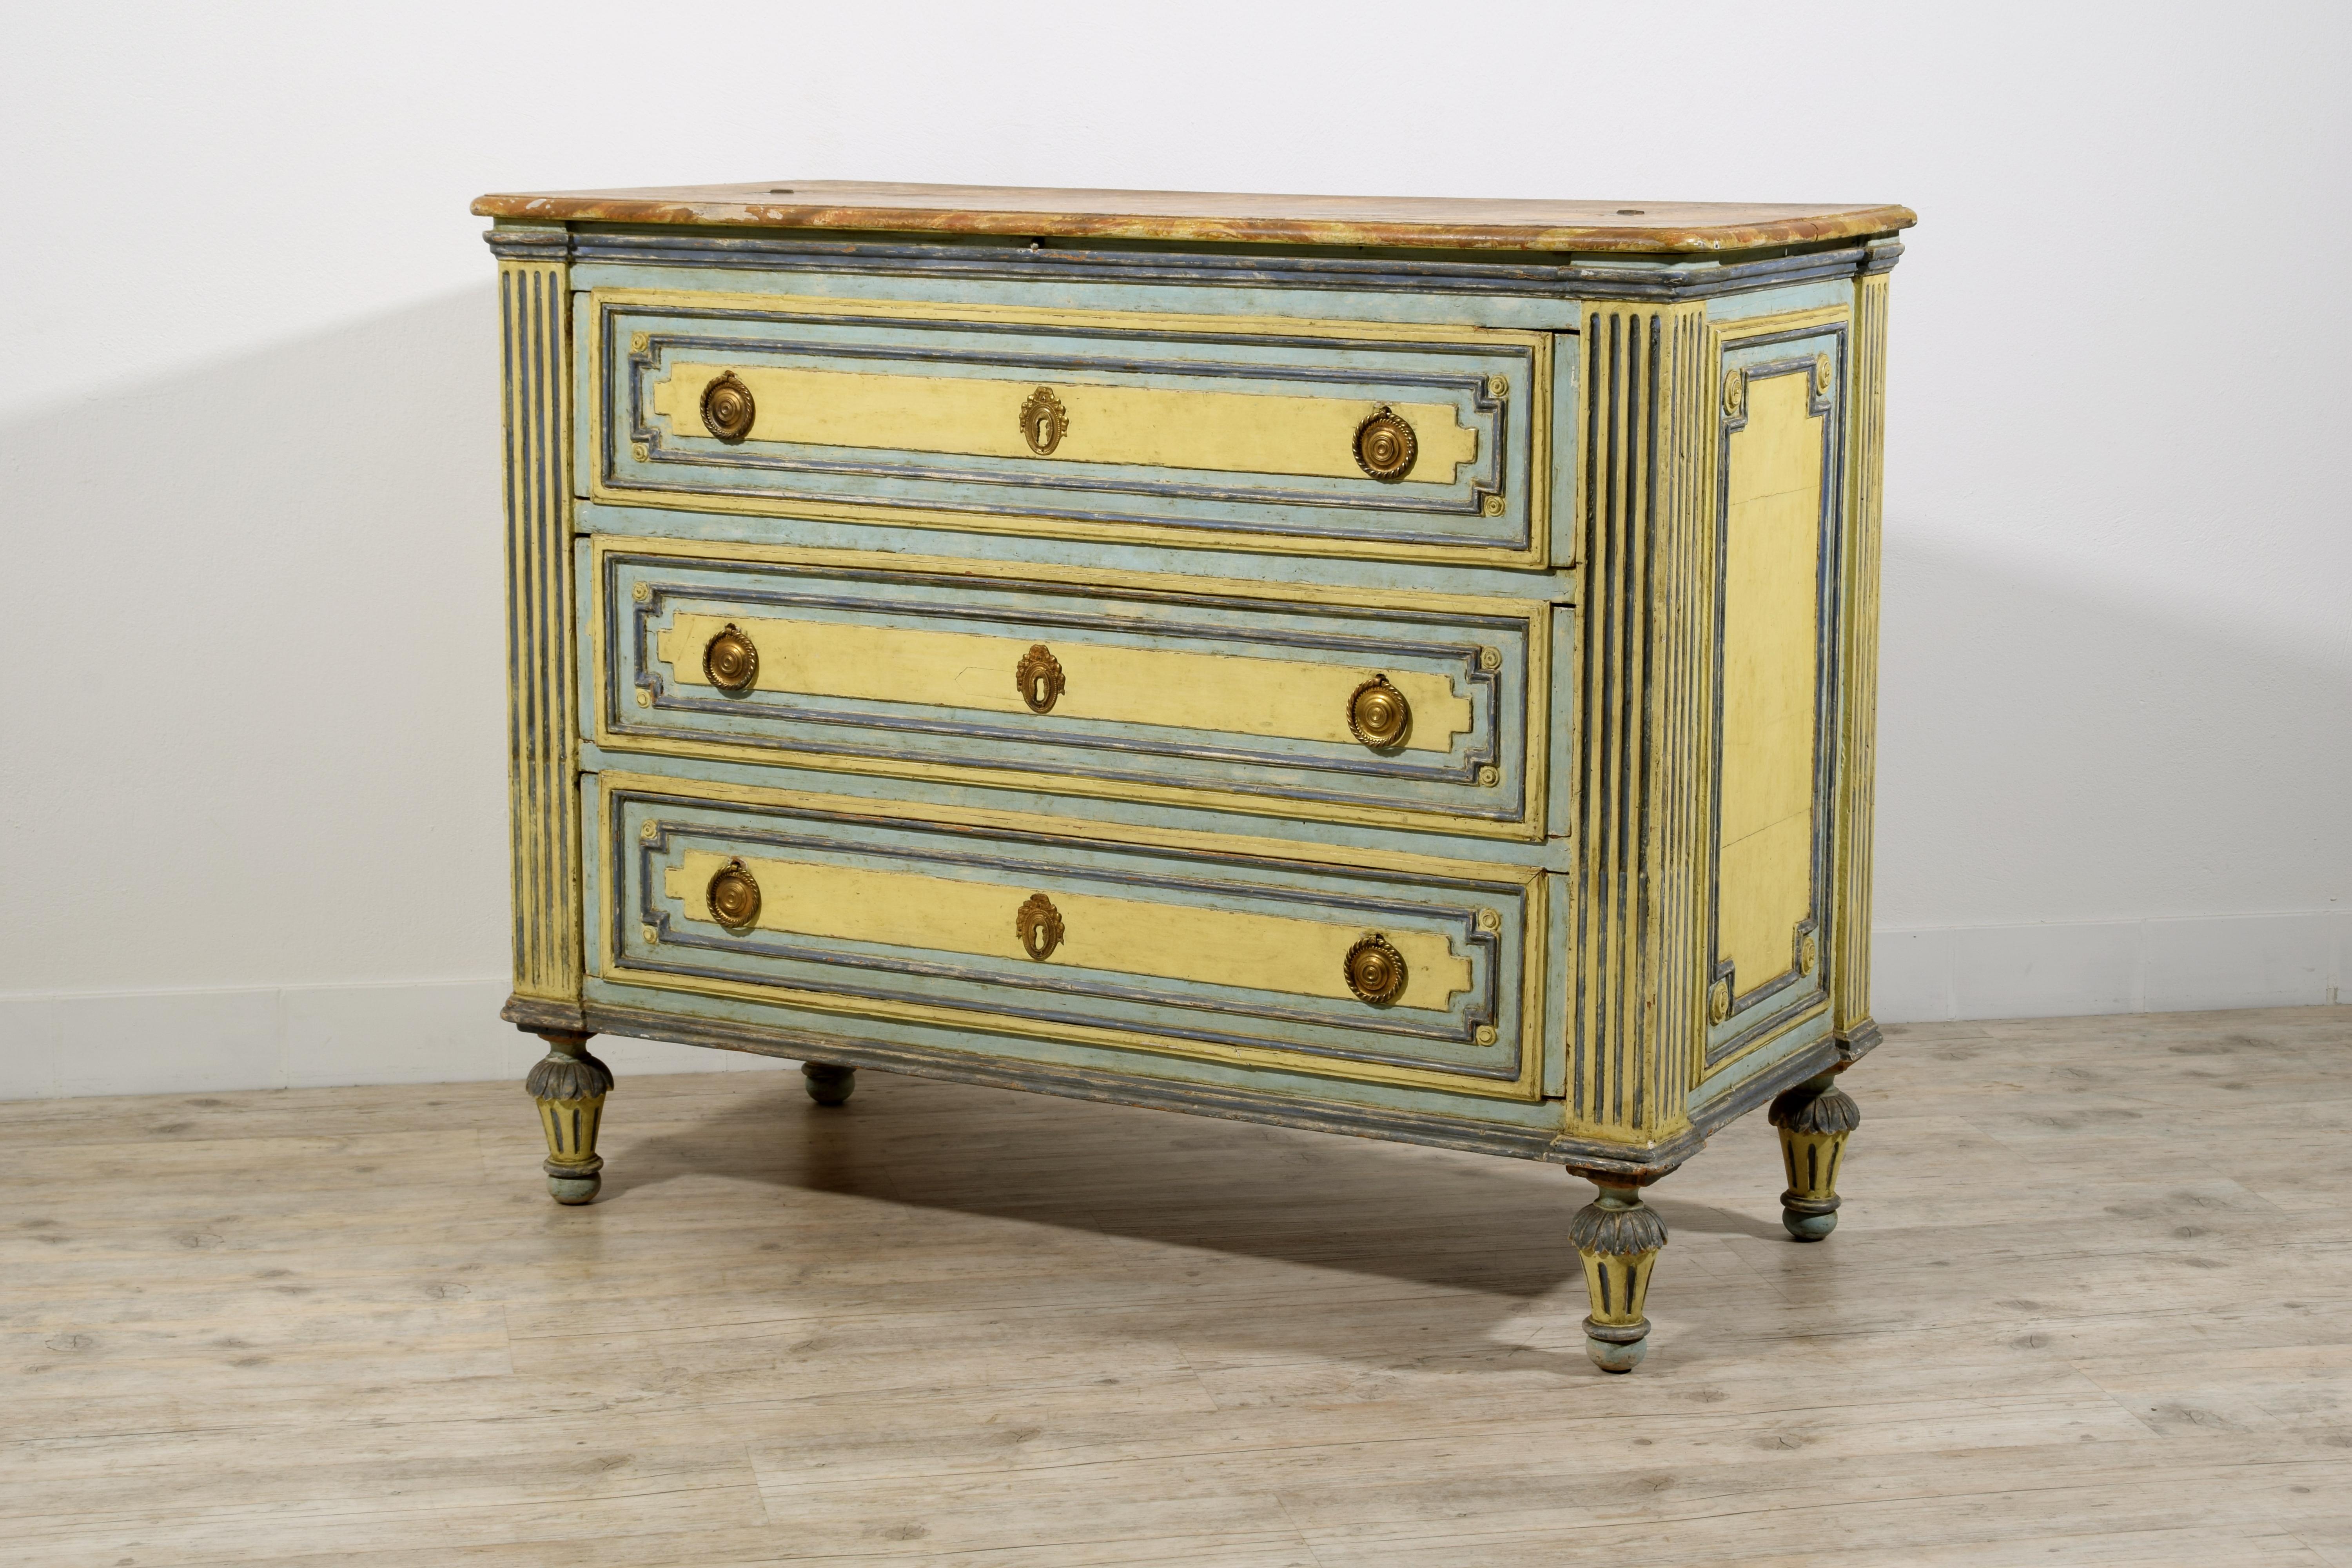 18th century, Italian Neoclassical Lacquered Wood Chest of Drawers 
This neoclassical chest of drawers was made in Piedmont in the second half of the 18th century, in carved and lacquered wood.
The rectangular top with rounded corners is lacquered